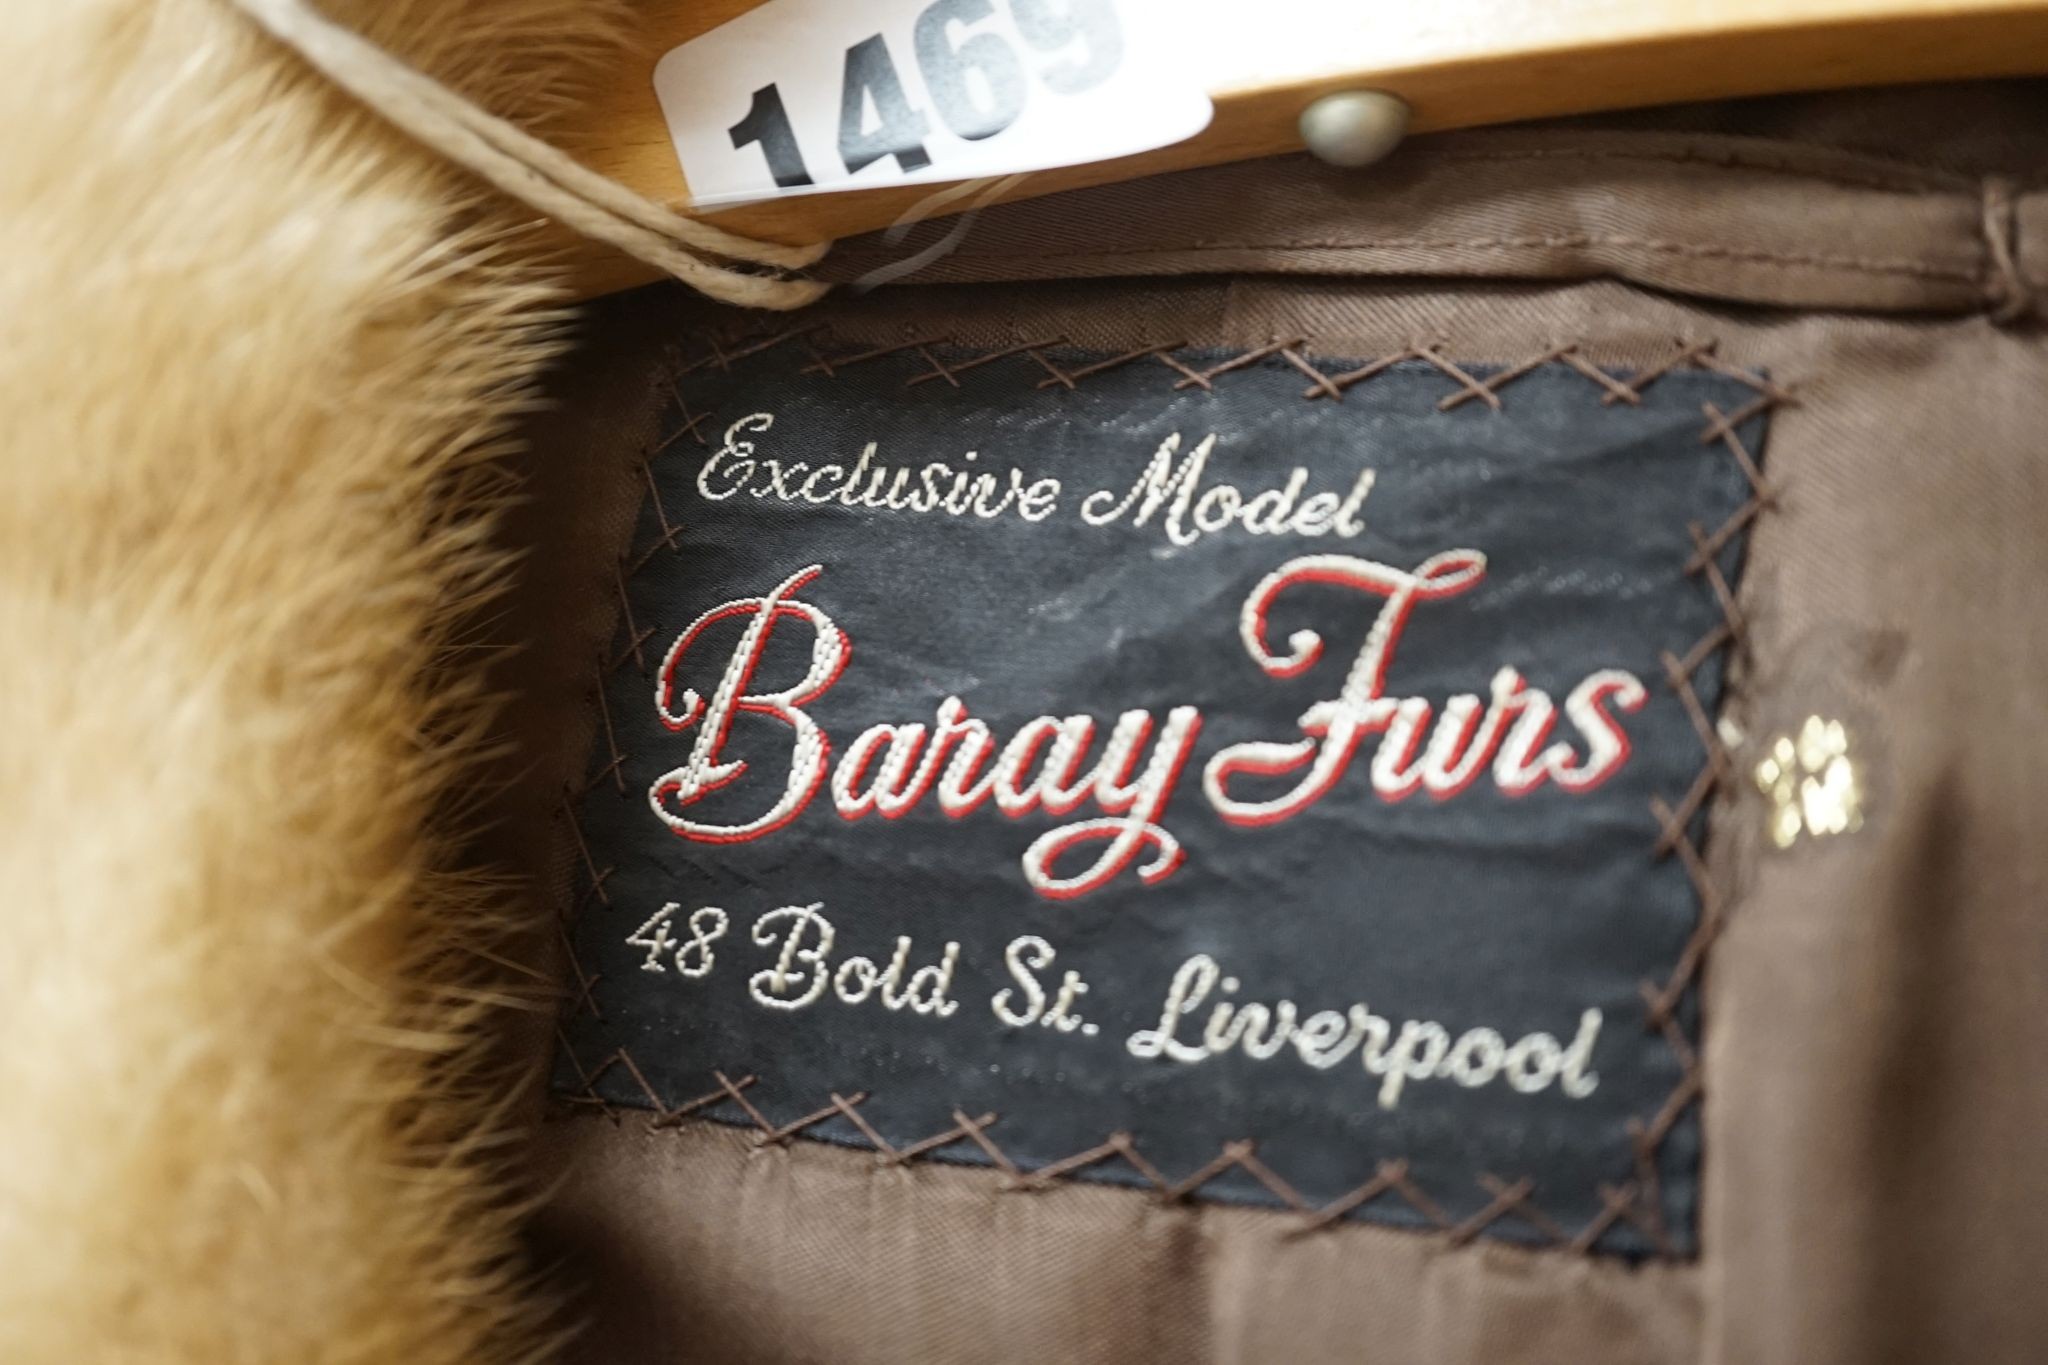 A ladies dark brown squirrel coat with blond mink collar by Baray Furs.